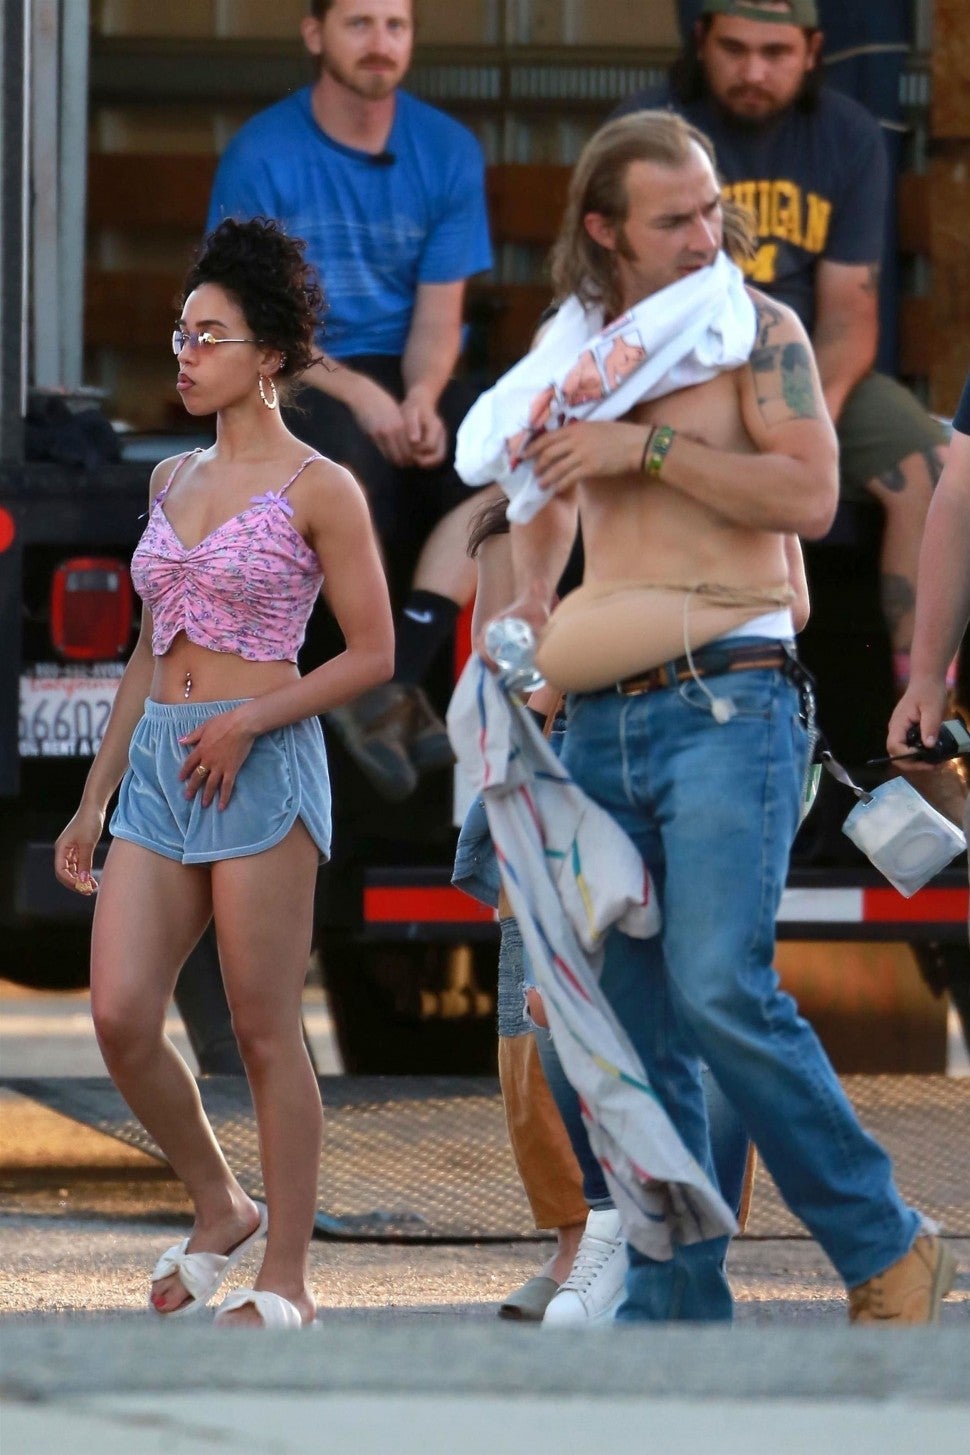 Shia LaBeouf and singer FKA twigs were spotted shooting scenes for their latest project 'Honey Boy' with Clifton Collins Jr. on the set.